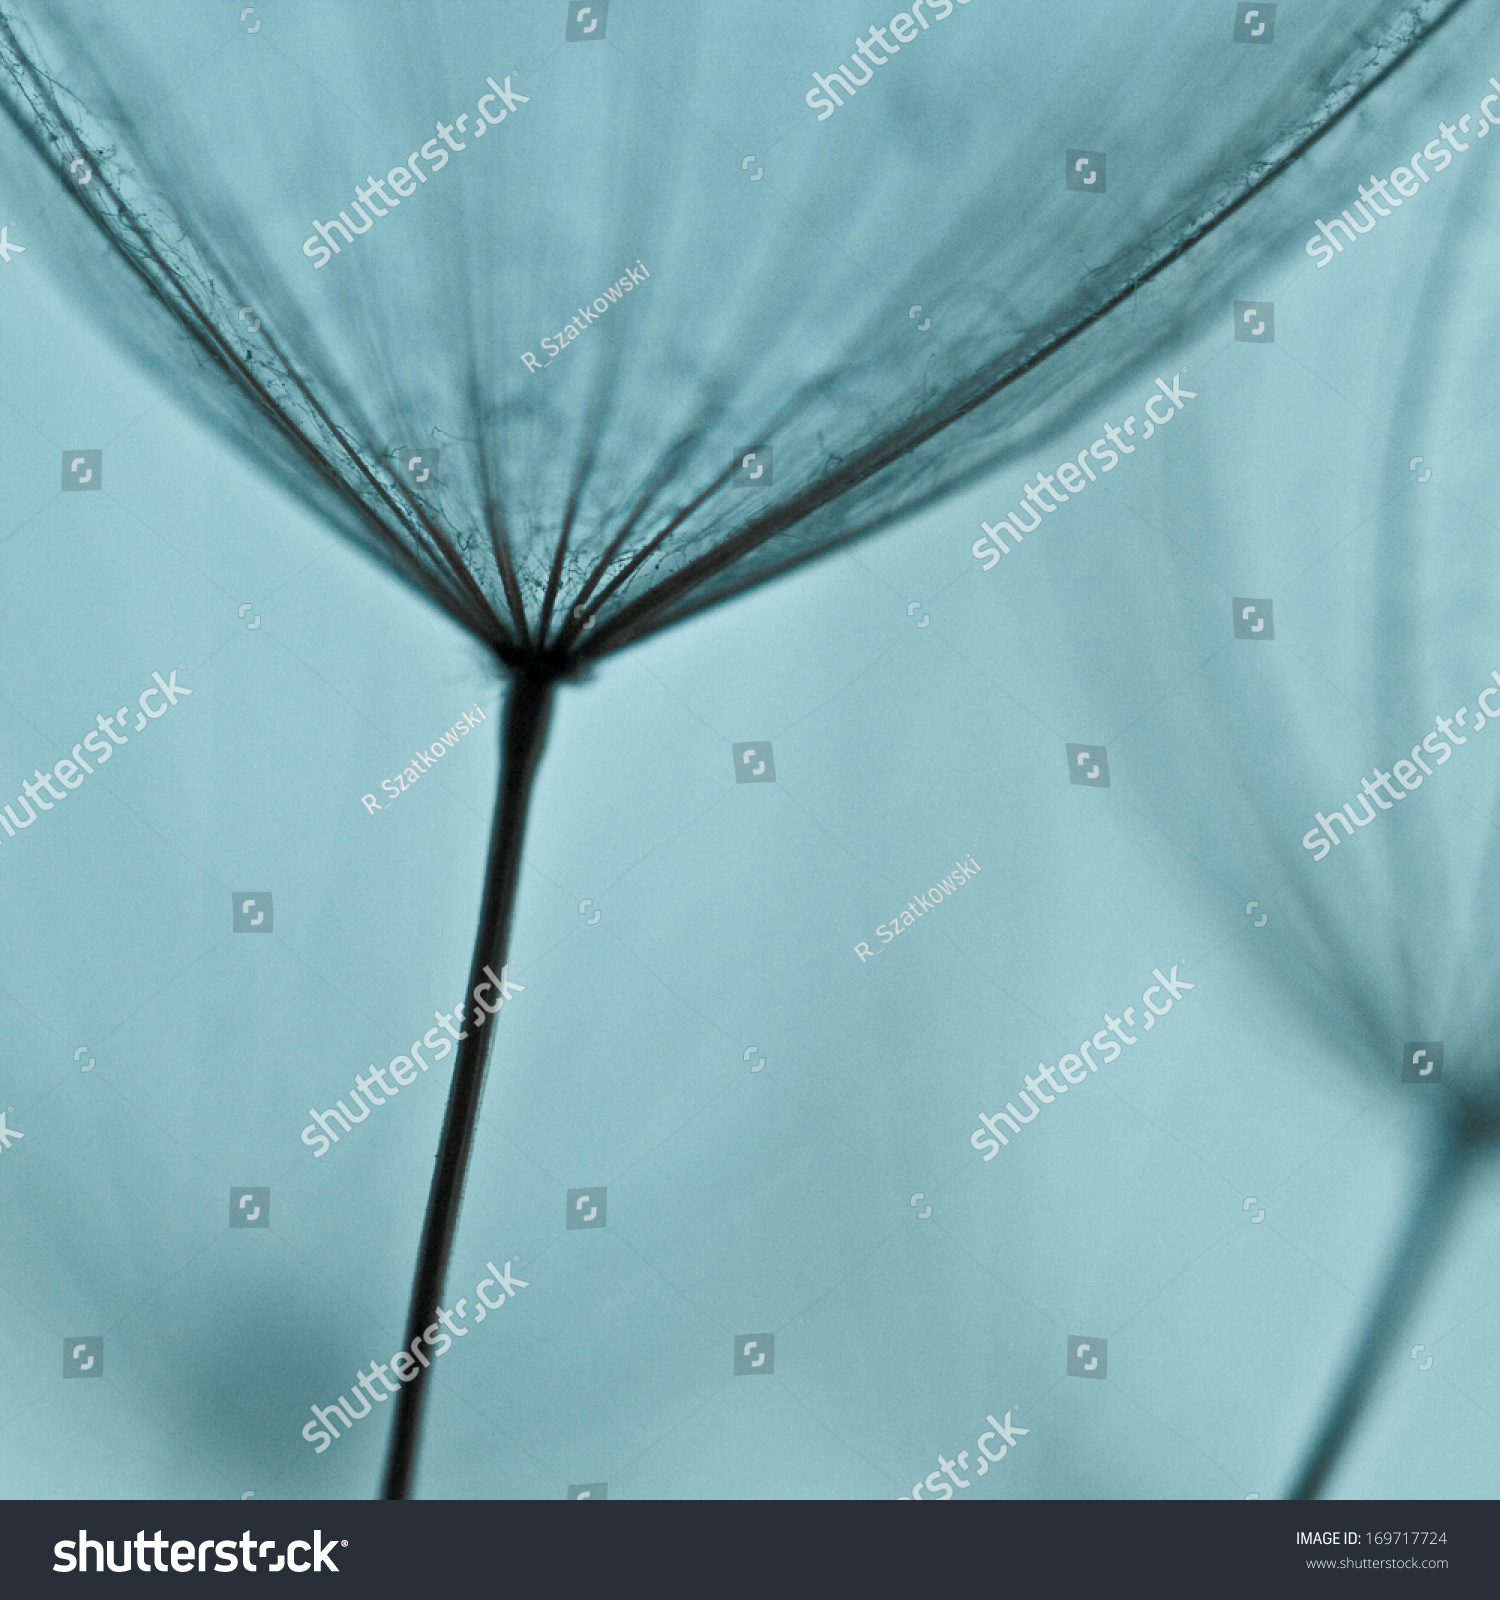 abstract dandelion flower background, extreme closeup with soft focus, beautiful nature details. Art photography  #169717724